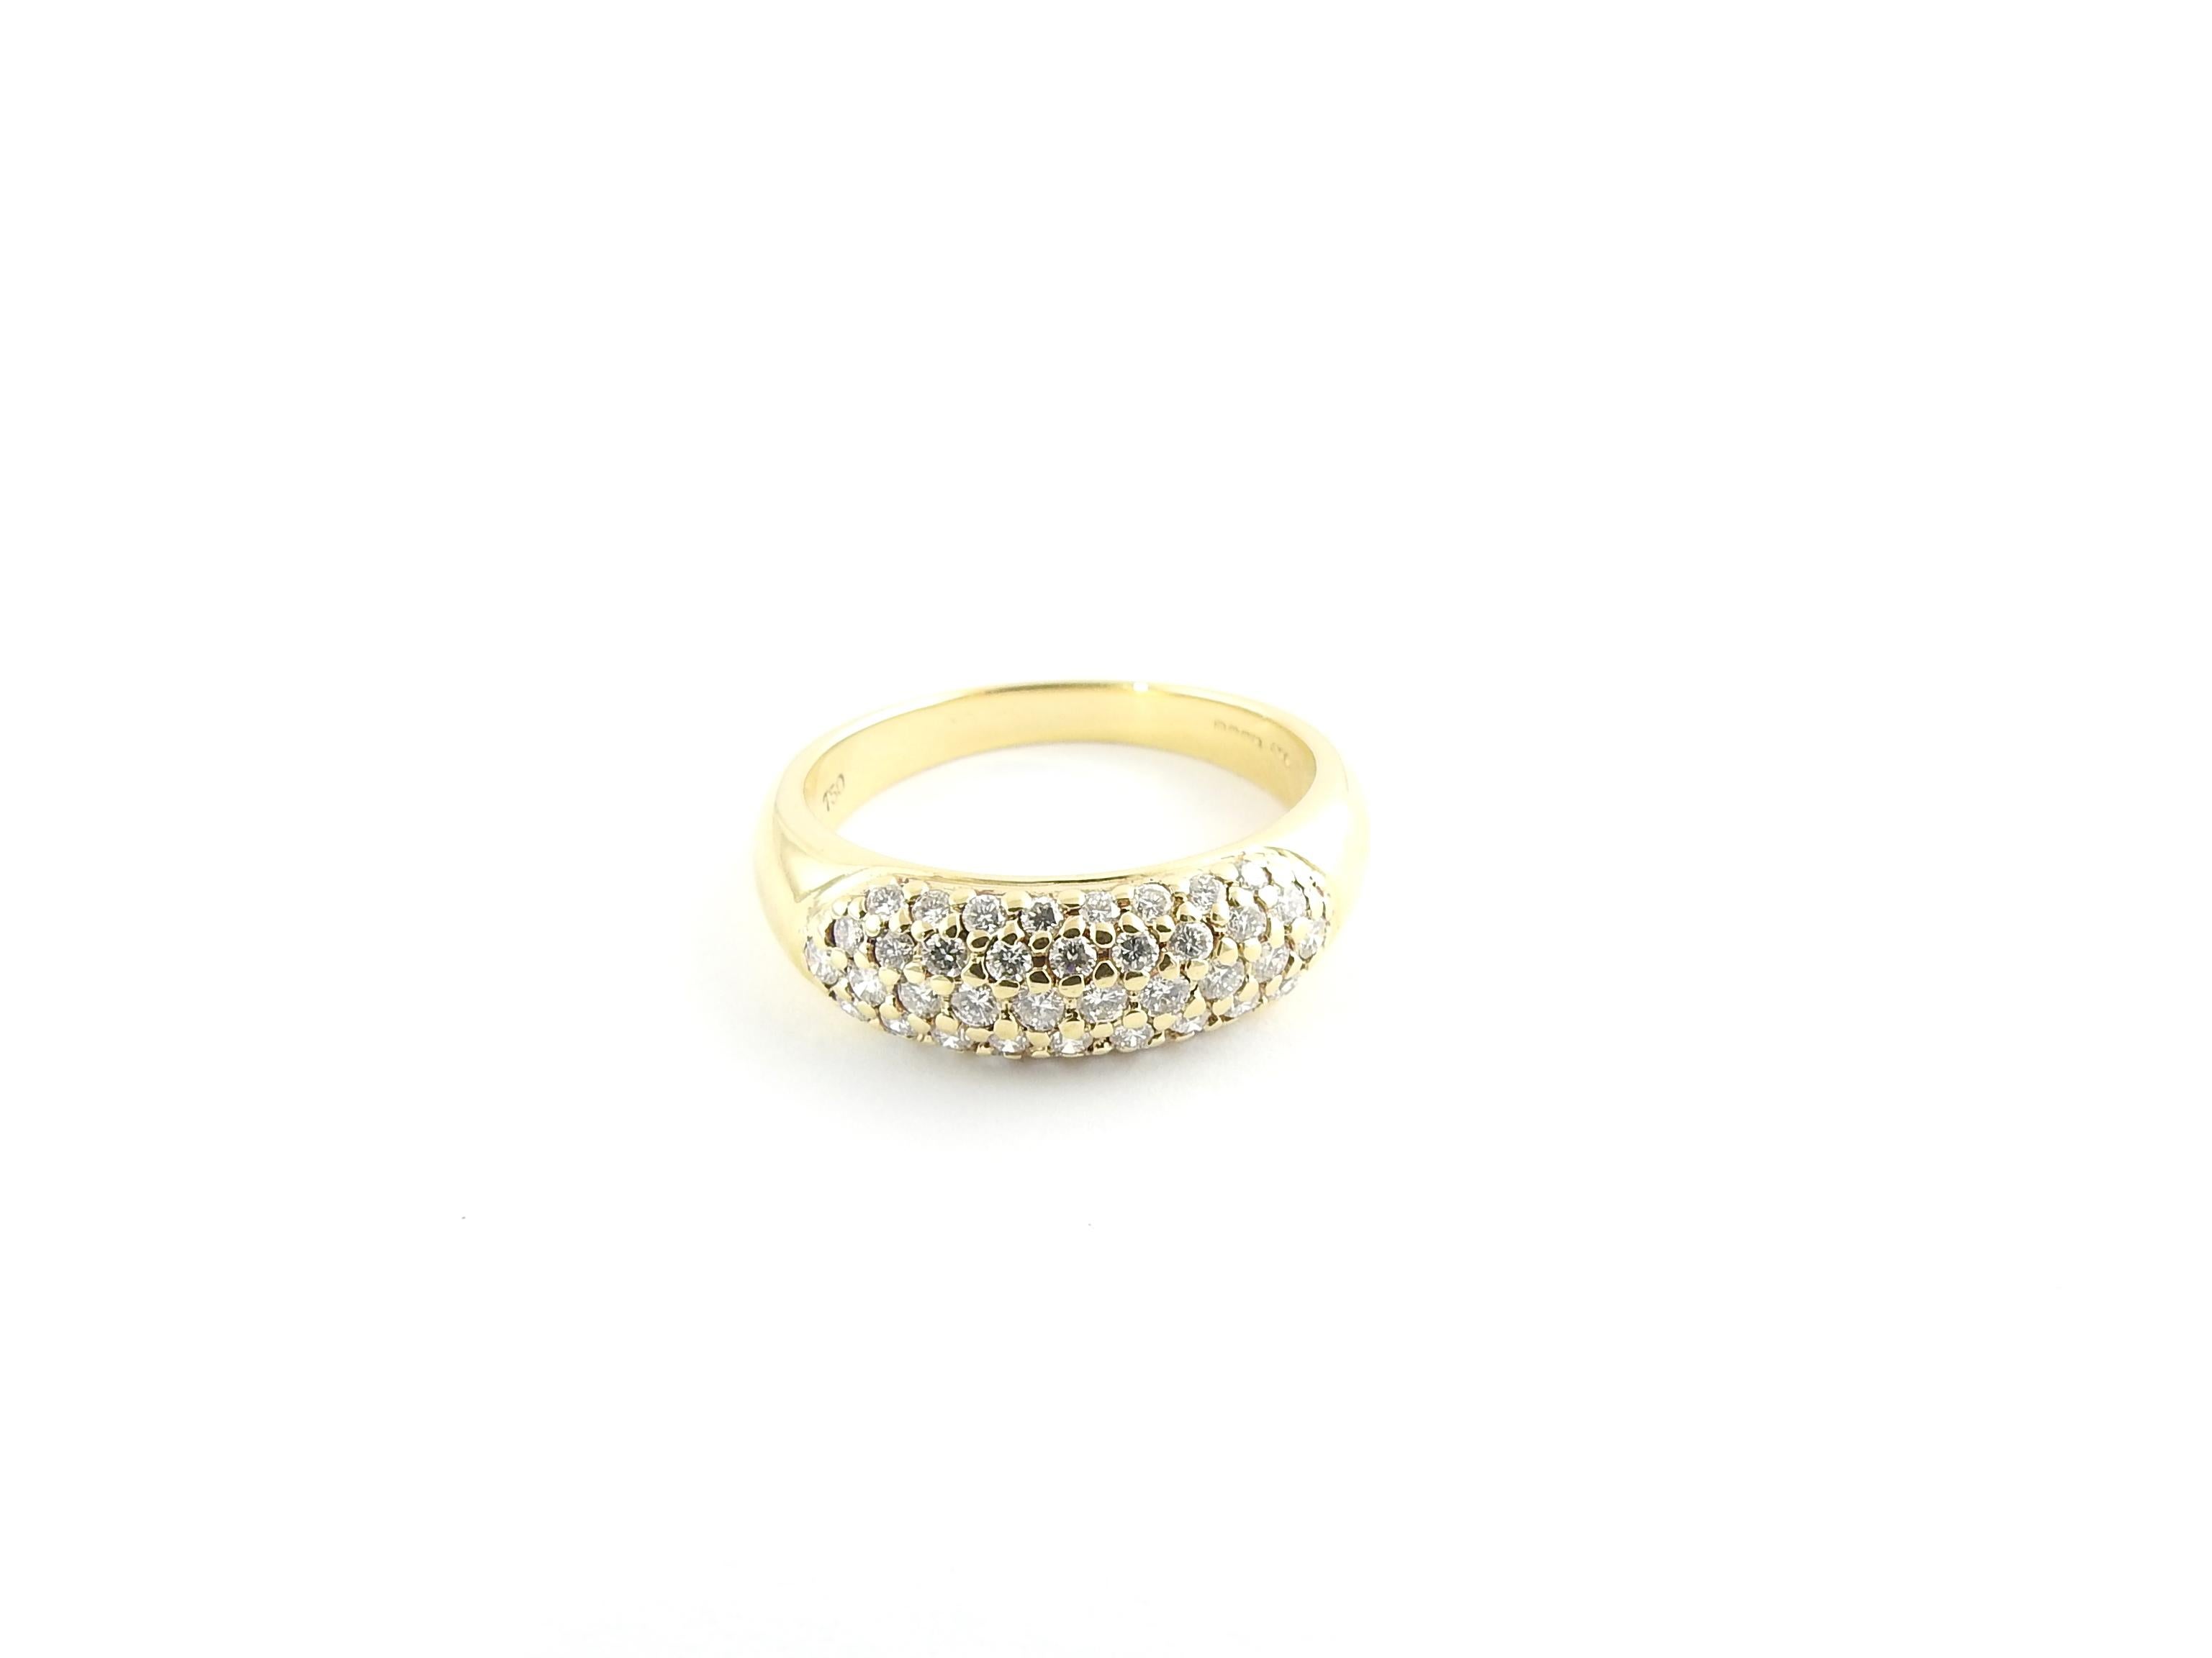 Vintage 18 Karat Yellow Gold and Diamond Ring Size 6.25

This sparkling wedding band features 44 round brilliant diamonds set in classic 18K yellow gold.

Width: 6 mm. Shank: 2 mm.

Approximate total diamond weight: .75 ct.

Diamond color: